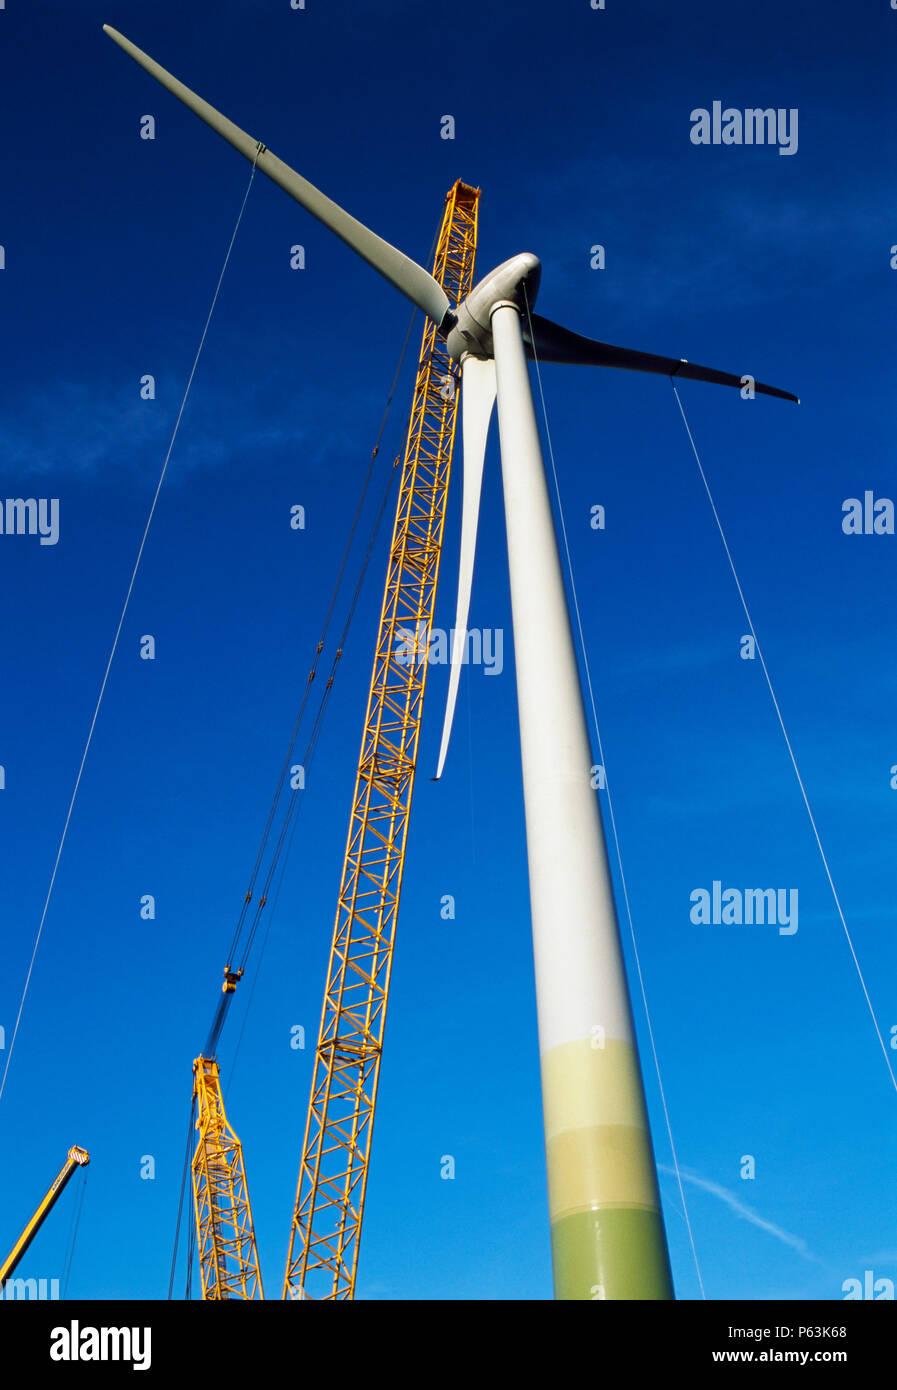 A giant Enercon wind turbine nears completion during its installation. Worksop United Kingdom. December 2008. Stock Photo